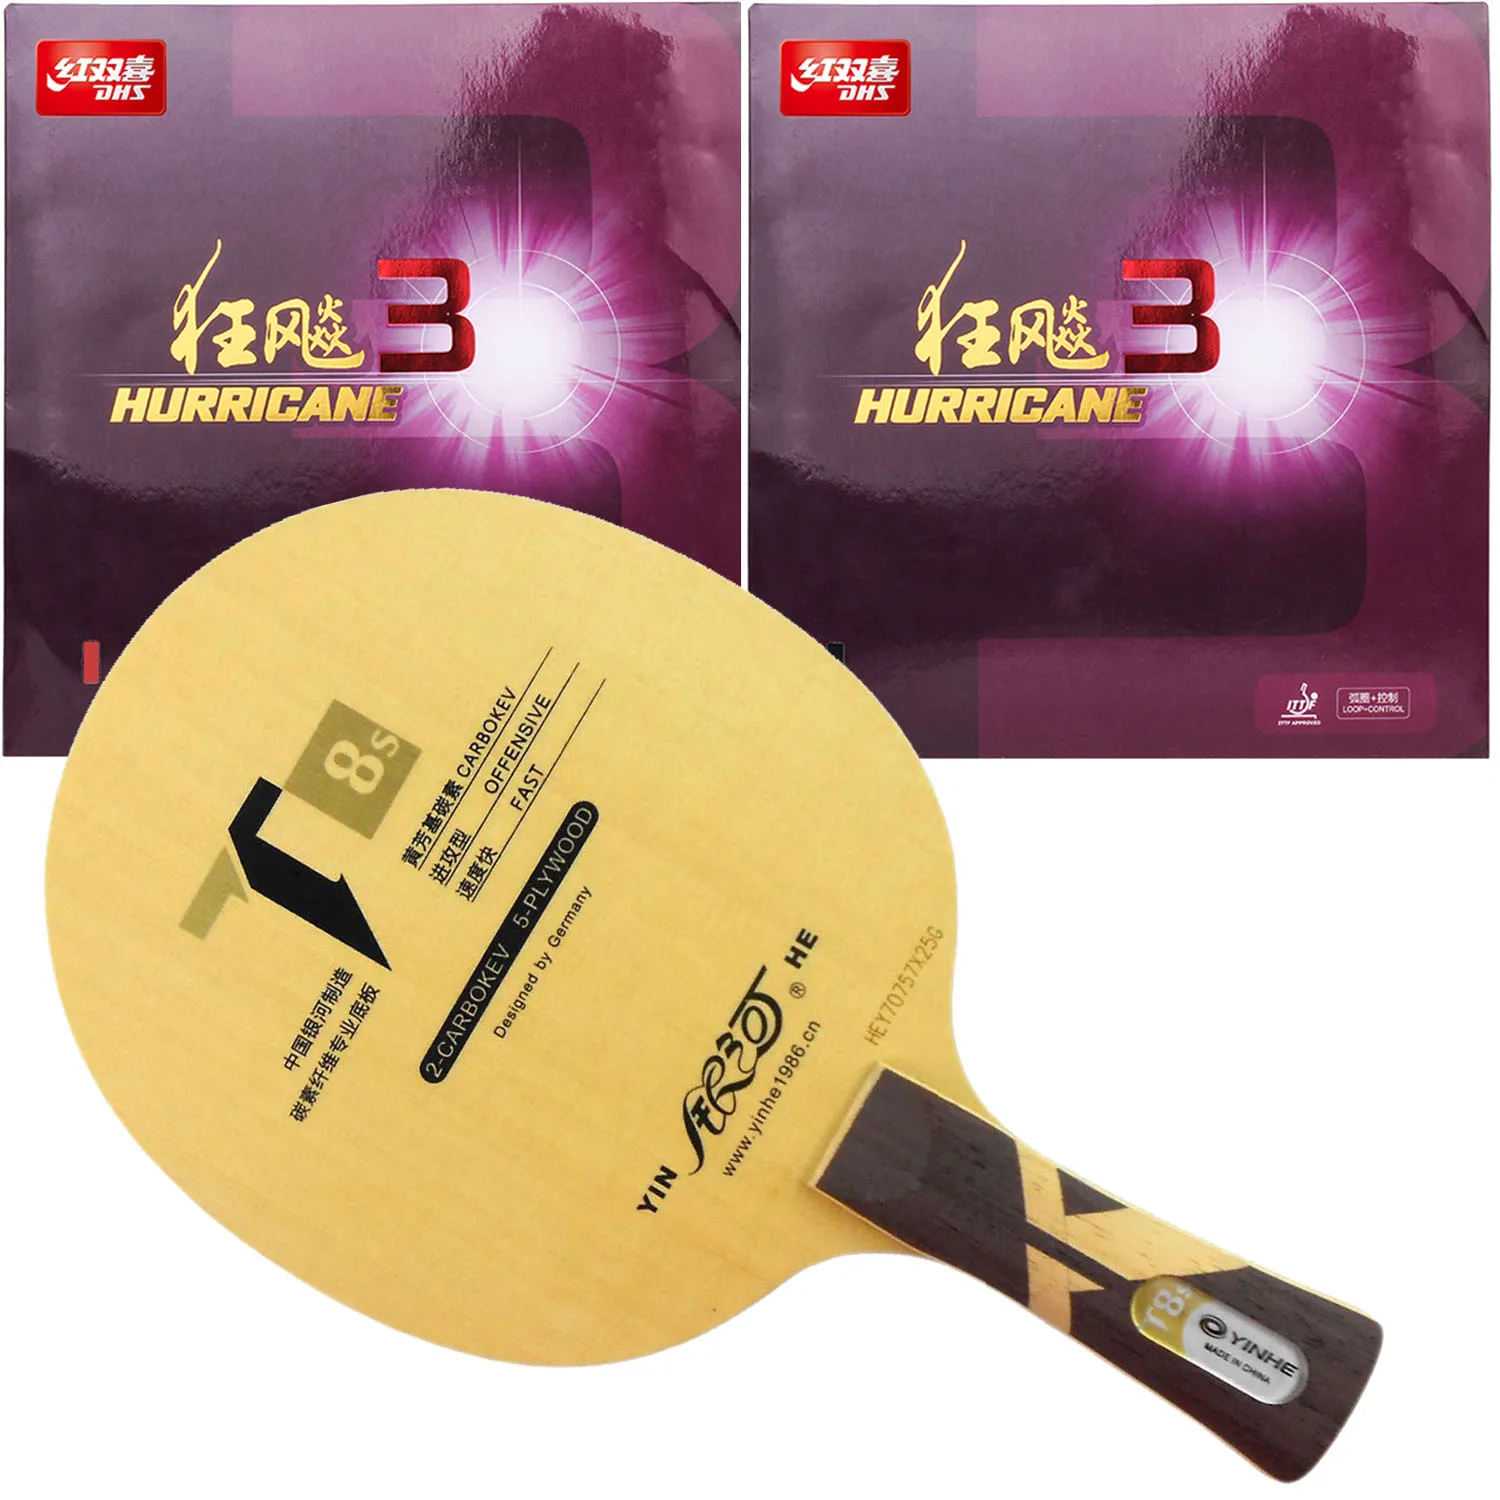 Pro Combo Racket Yinhe T-8s Table Tennis blade With 2Pieces DHS Hurricane3 PingPong Rubber with Sponge